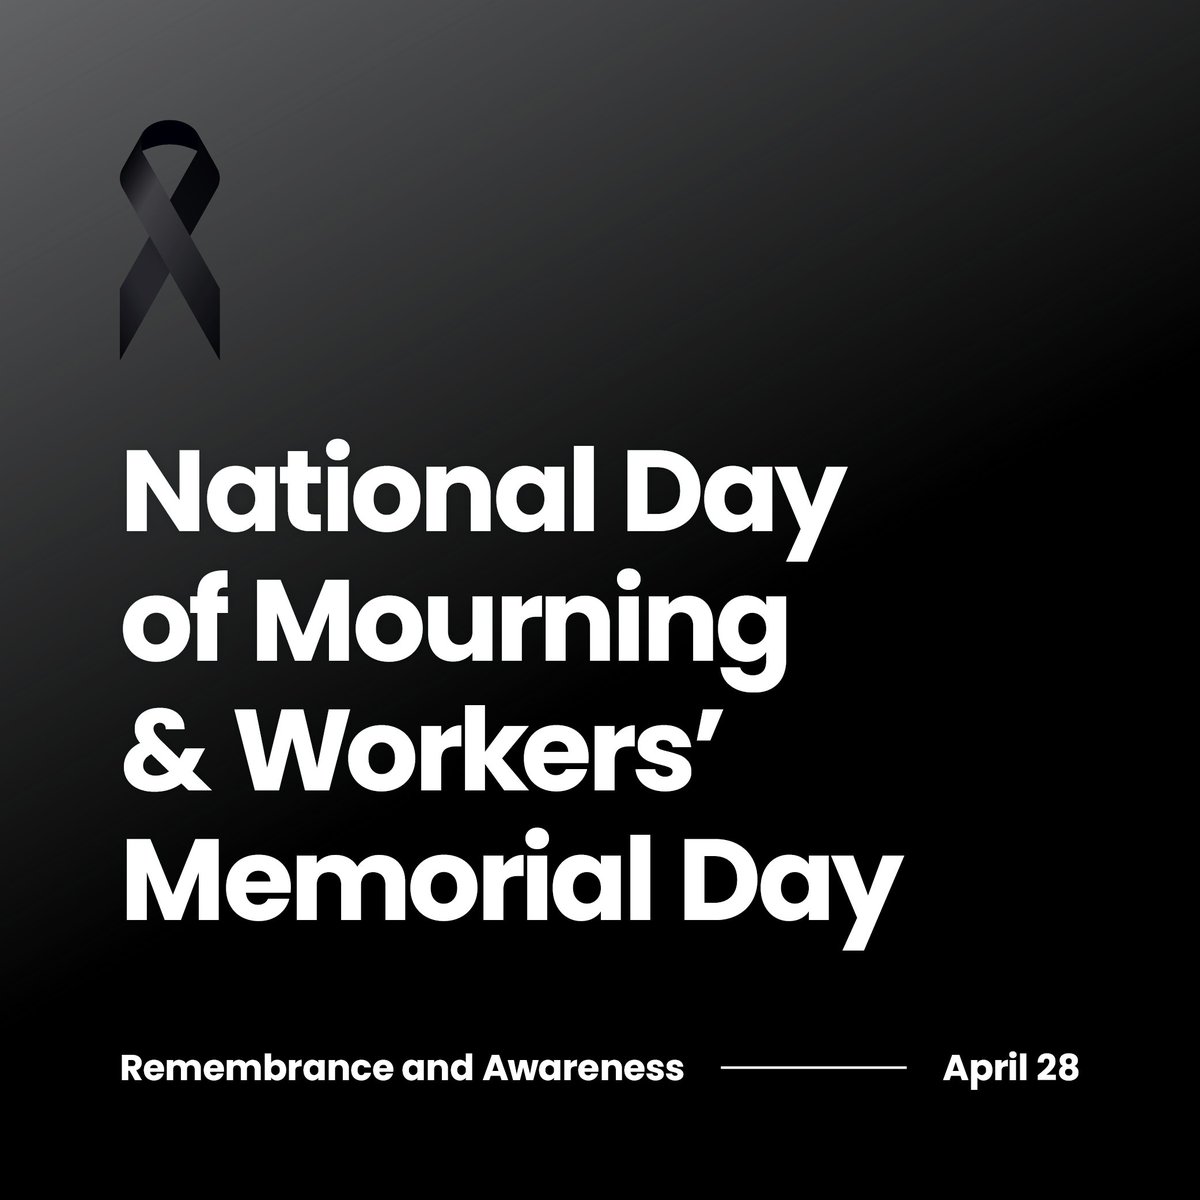 April 28 is the National Day of Mourning in Canada and Workers’ Memorial Day around the globe. It’s a day we remember and honour those who were injured or lost their lives due to a work-related tragedy. At Valiant TMS, safety is everyone’s responsibility. #DayOfMourning